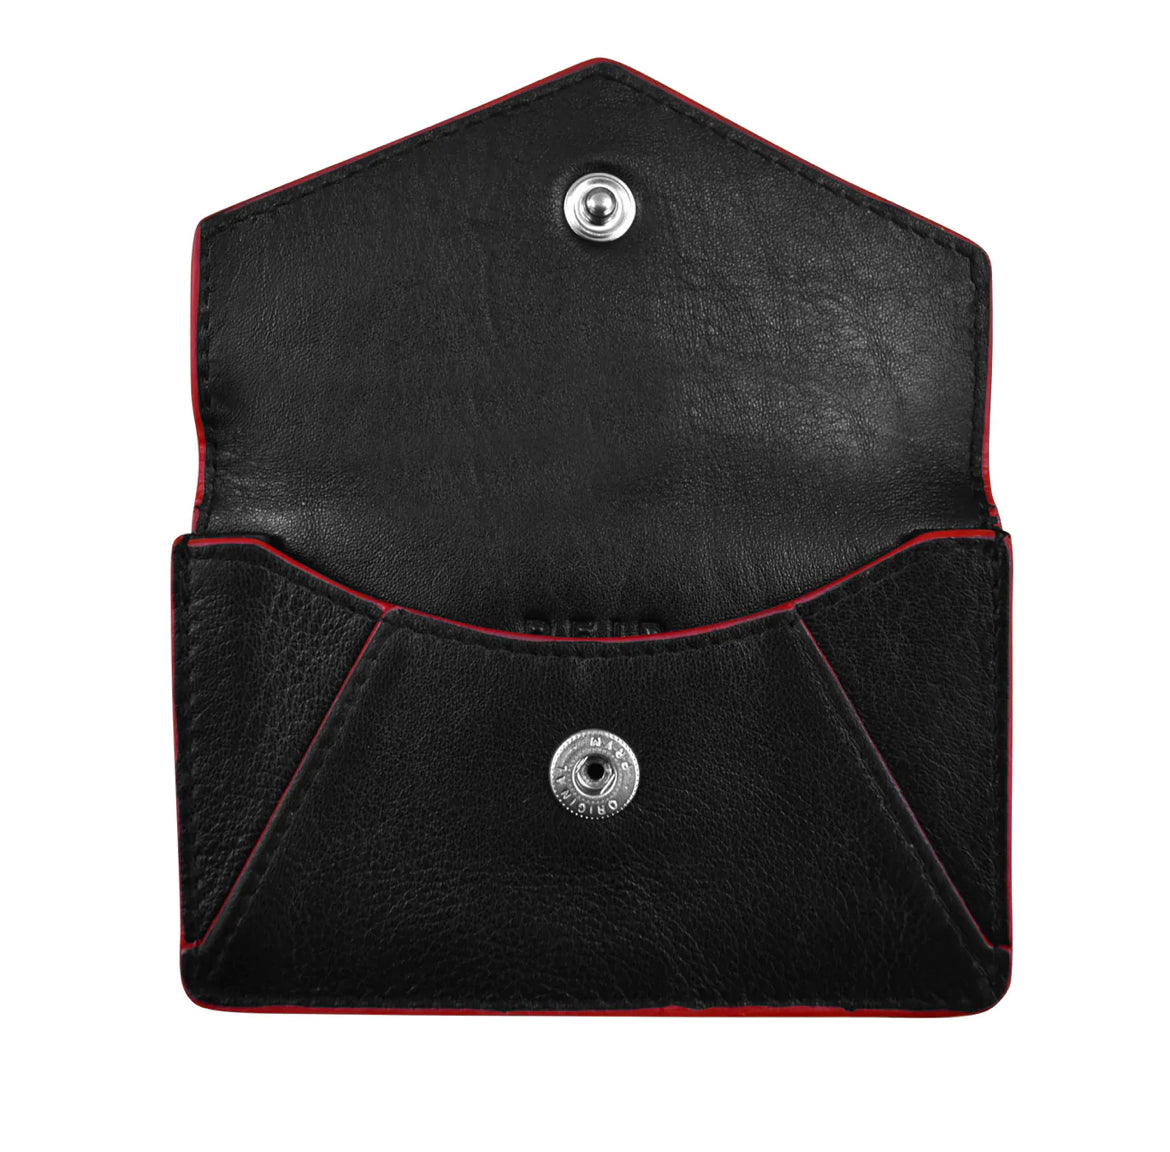 ili New York RFID Card Case Leather Wallet (Black/Red)